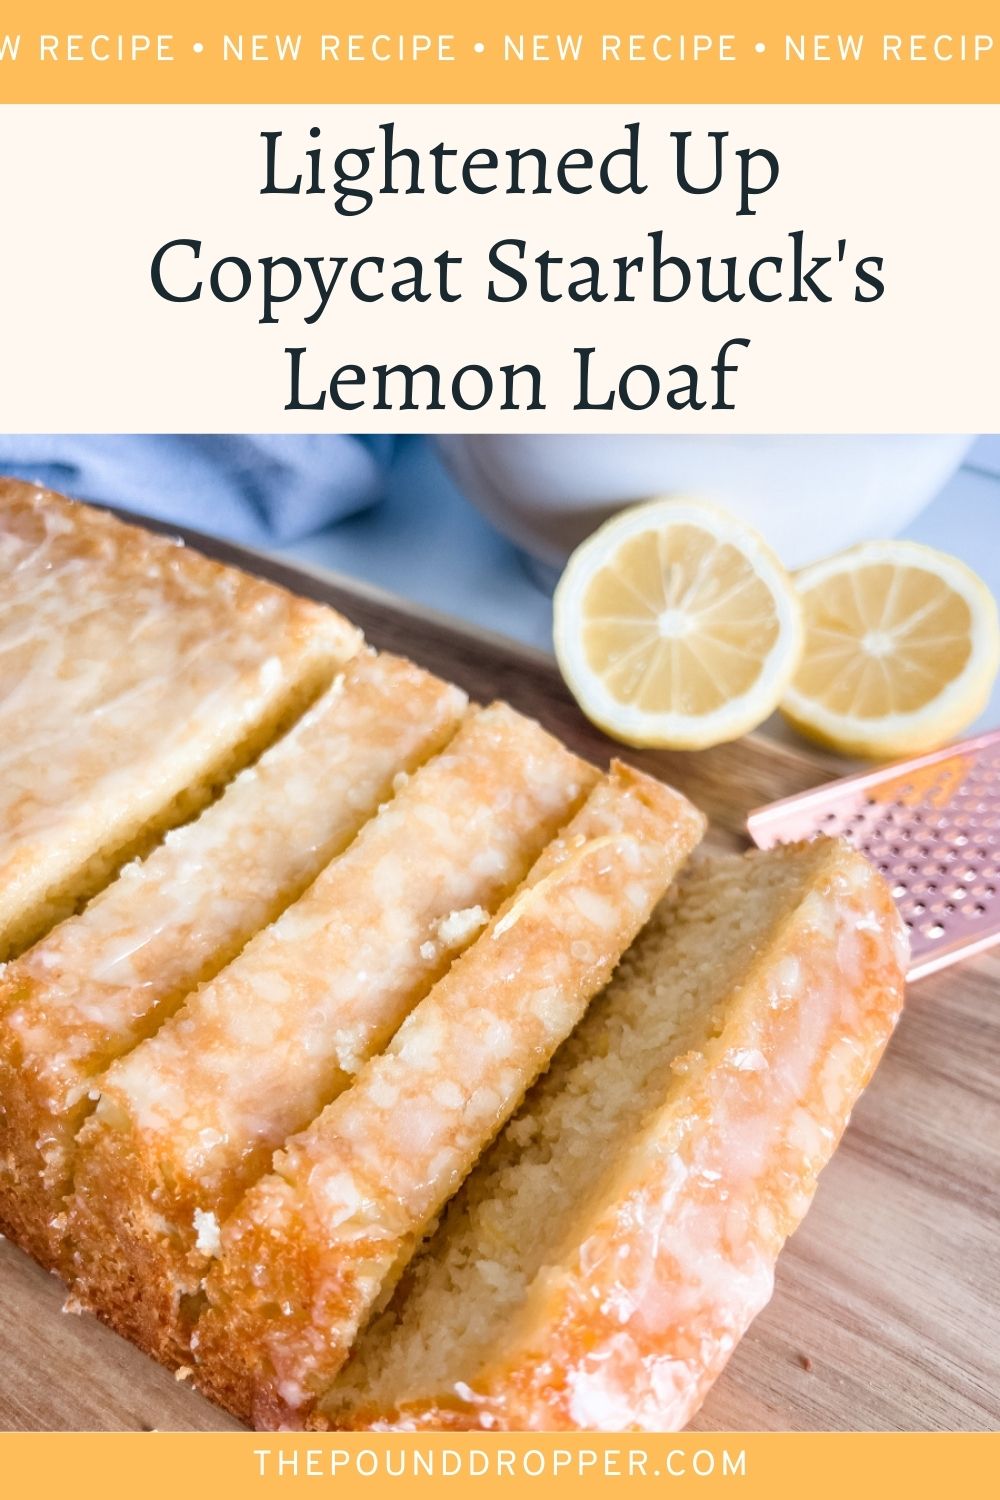 TThis amazing Lightened Up Copycat Starbucks Lemon Loaf is the absolute best! It’s light, super moist, and bursting with lemon flavor. If you’re a huge of the Starbucks lemon loaf, then you will love this lemon loaf!